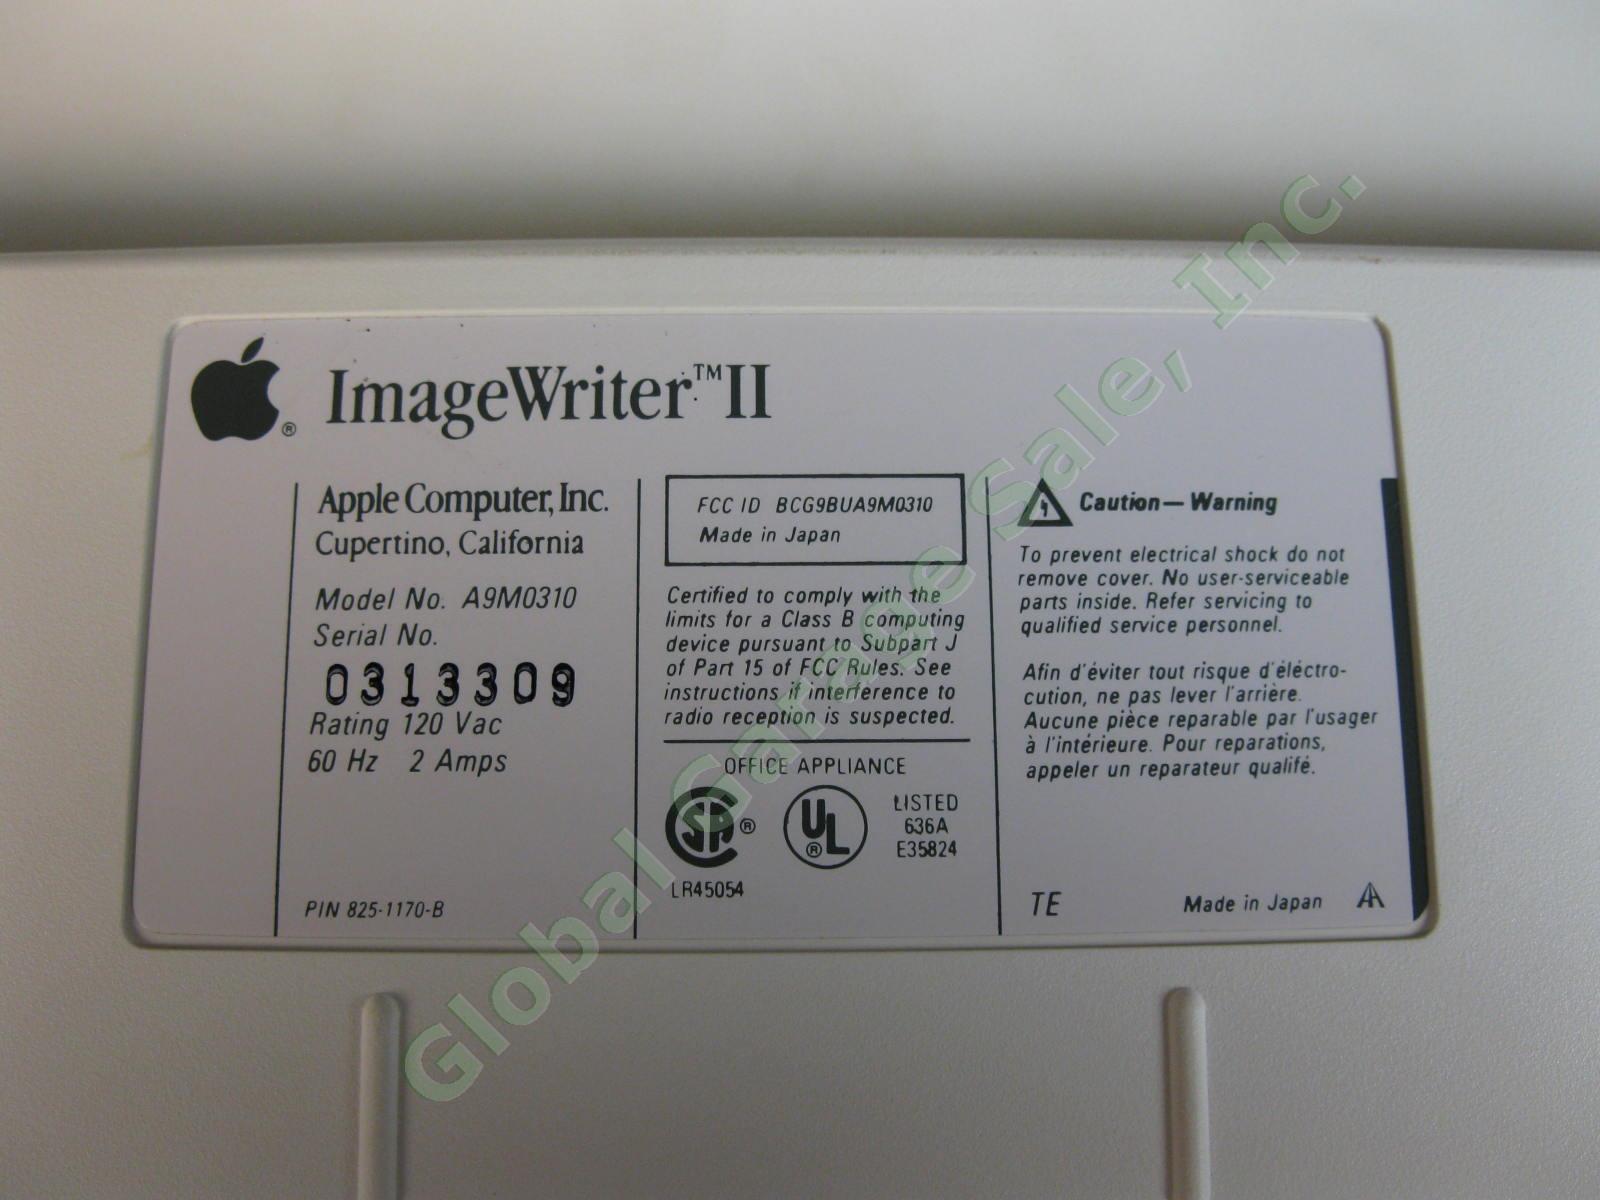 VTG Apple ImageWriter II Printer Manual Excellent Condition WORKING Needs Ribbon 7